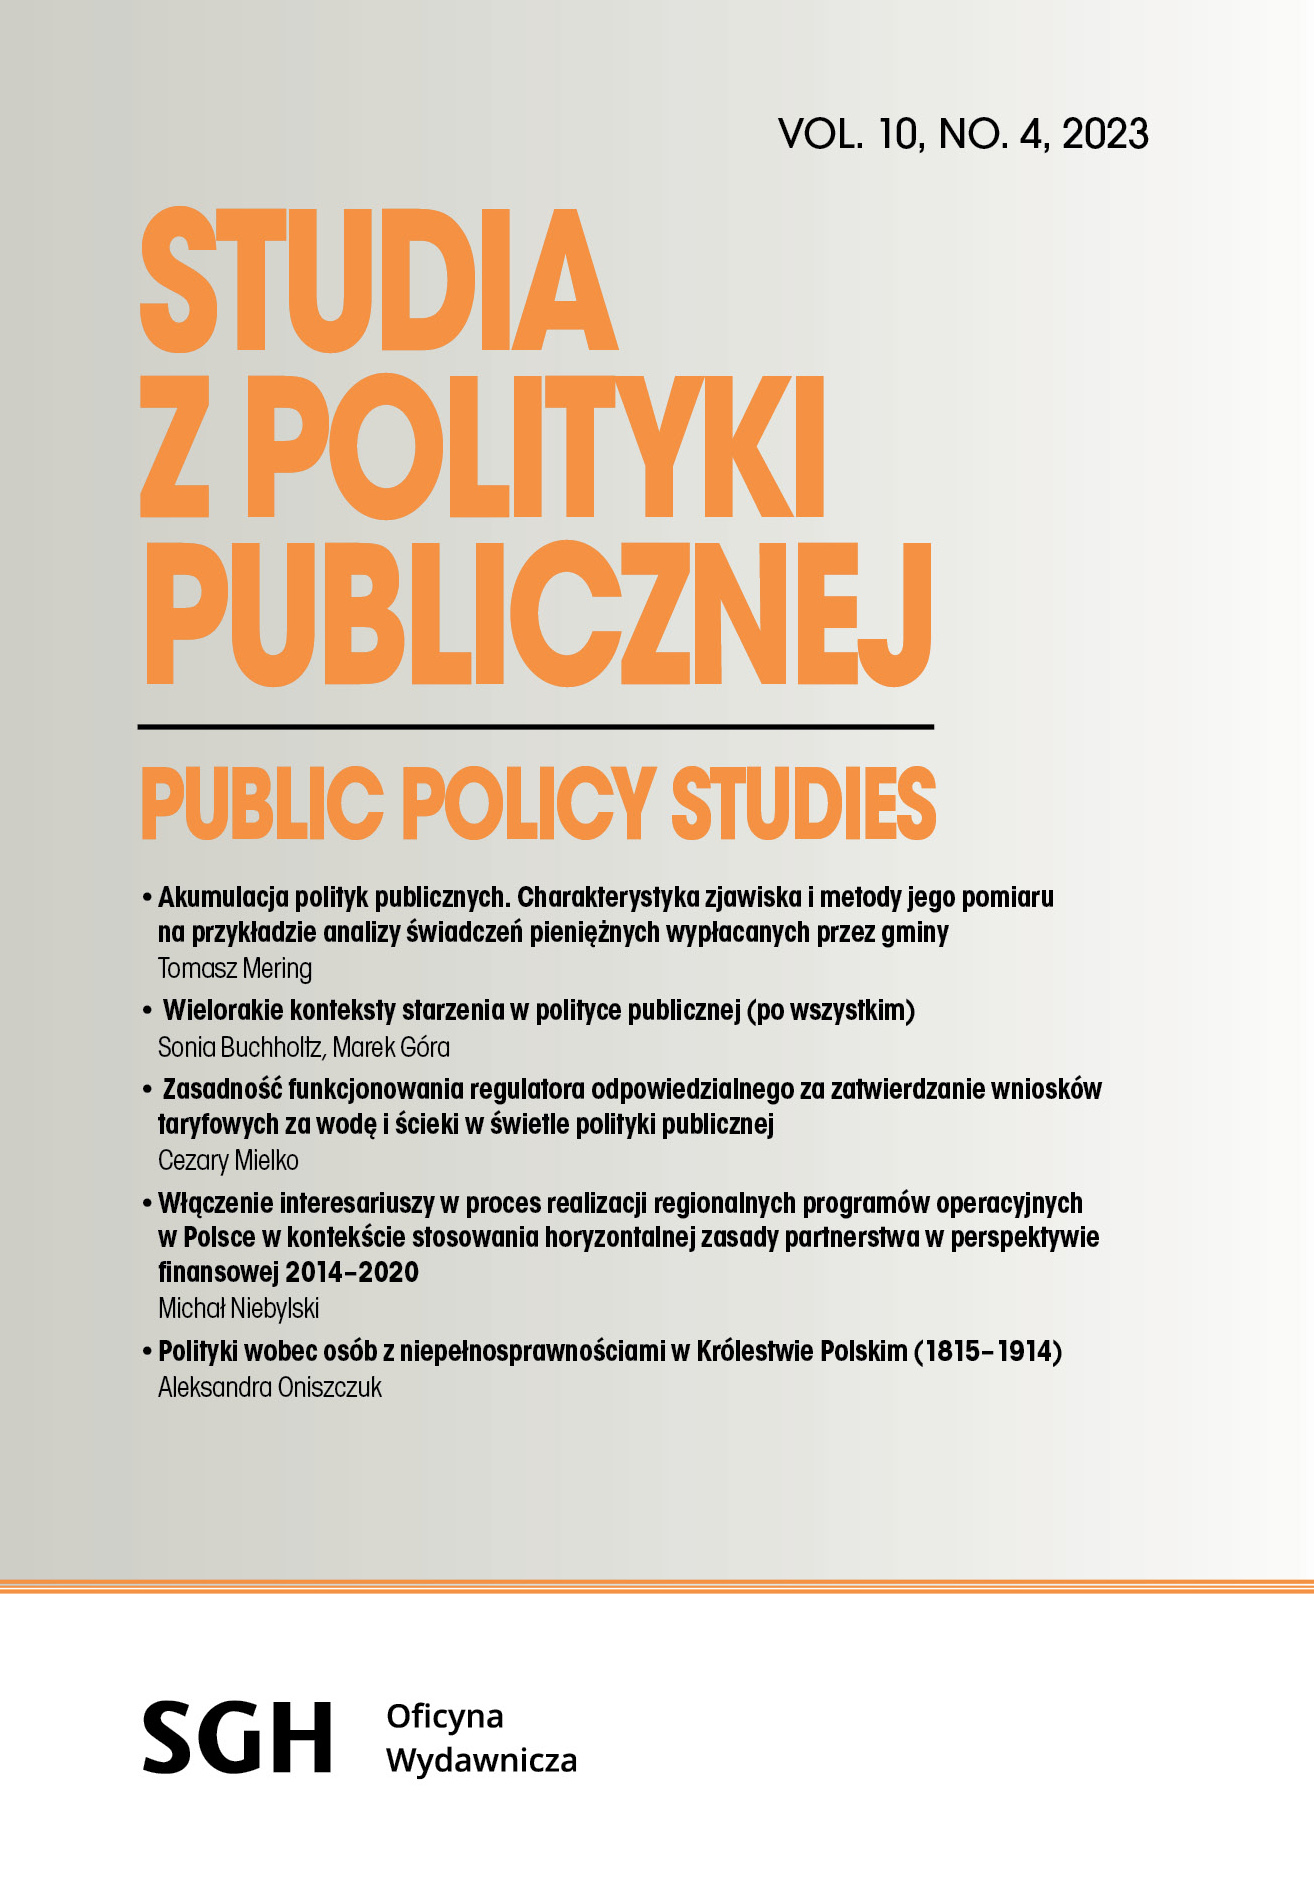 Involvement of stakeholders in the implementation of regional operational programmes in Poland in terms of the application of the horizontal partnership rule in the 2014–2020 financial perspective Cover Image